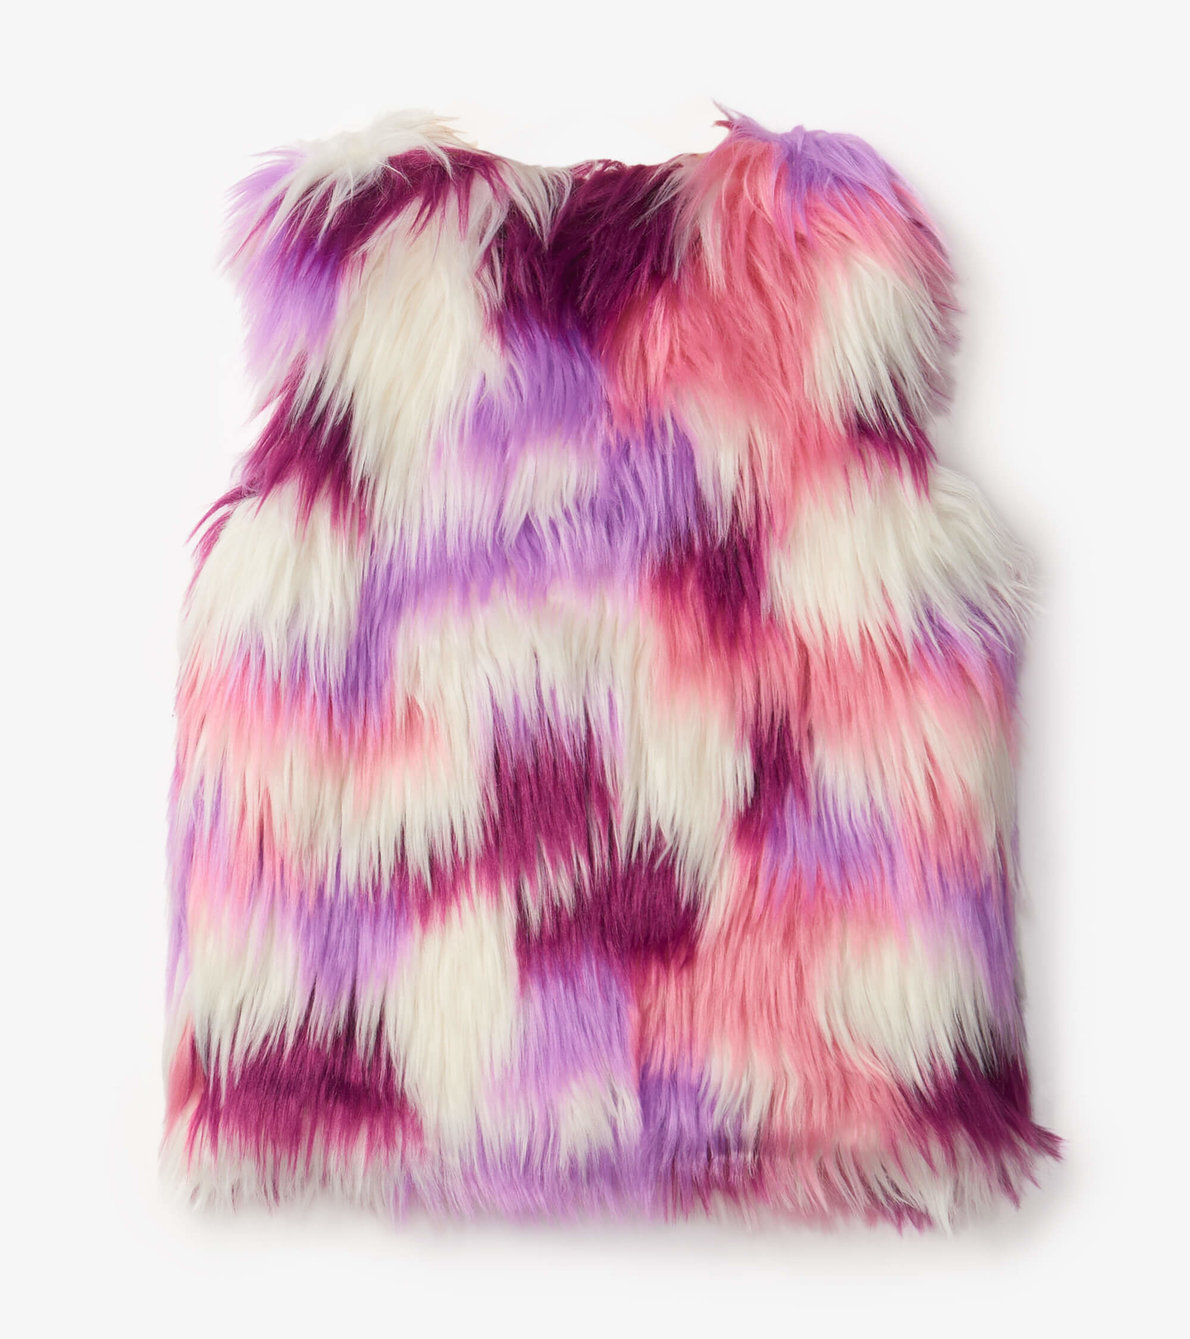 View larger image of Girls Groovy Faux Fur Vest